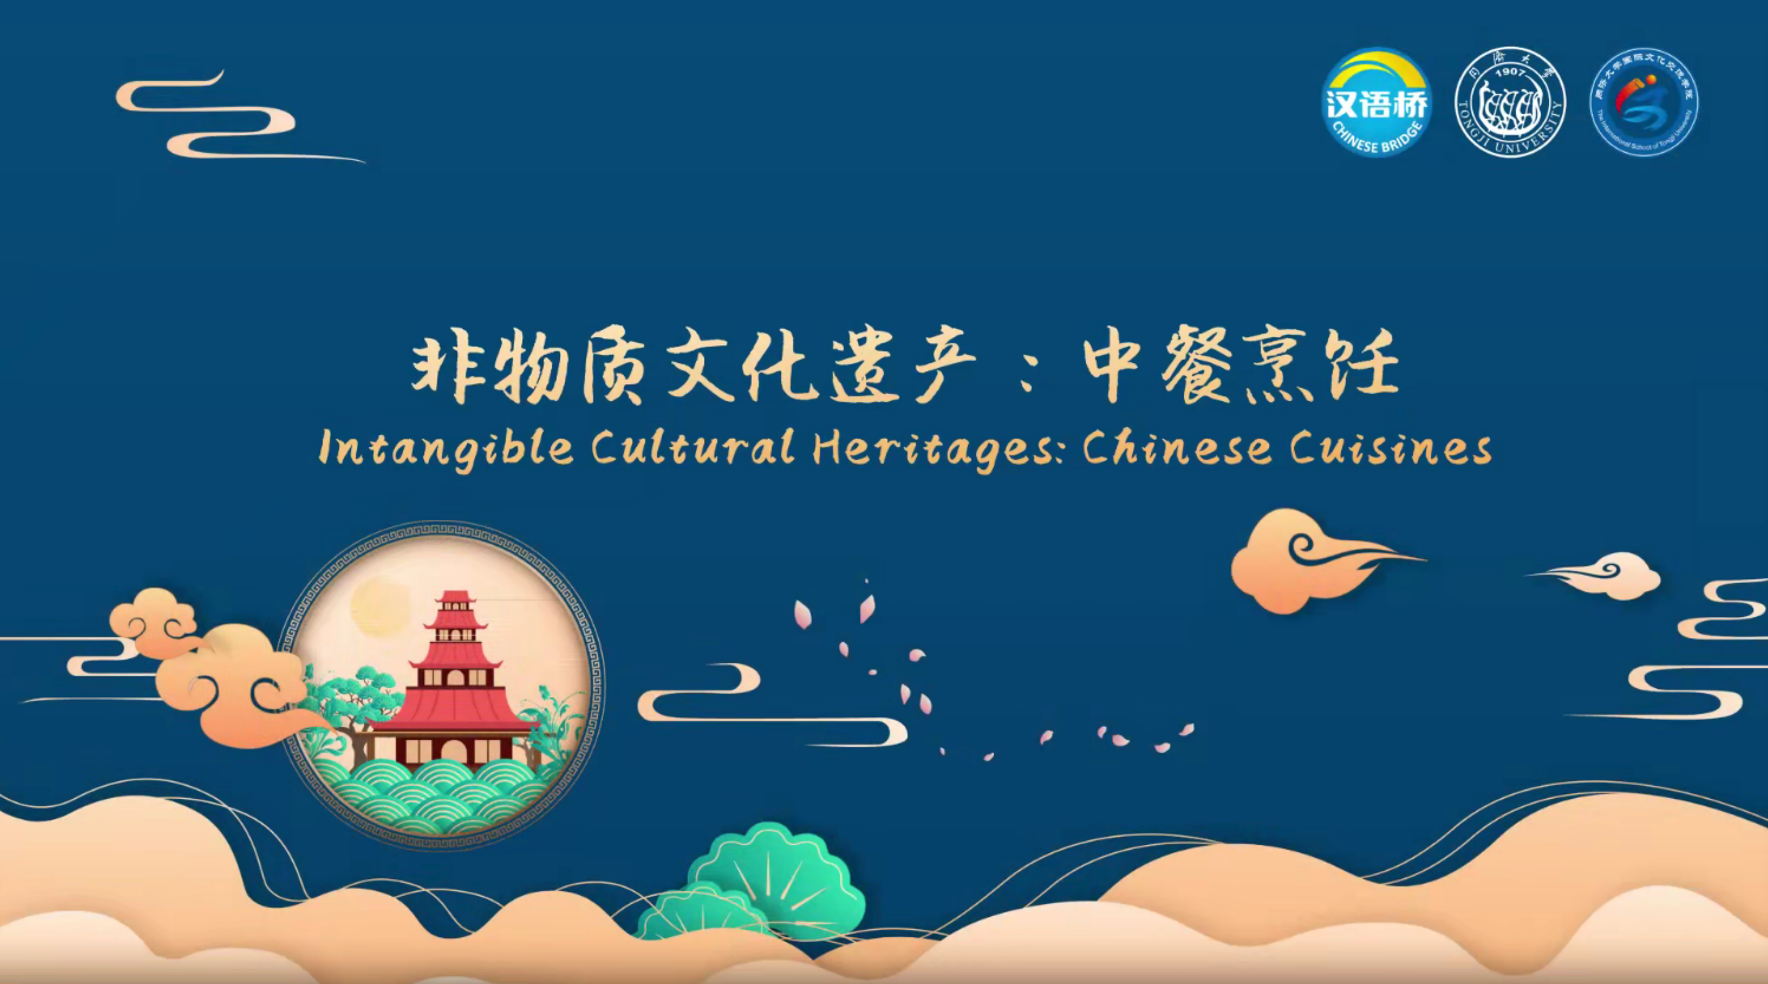 Intangible Cultural Heritages: Chinese Cuisines